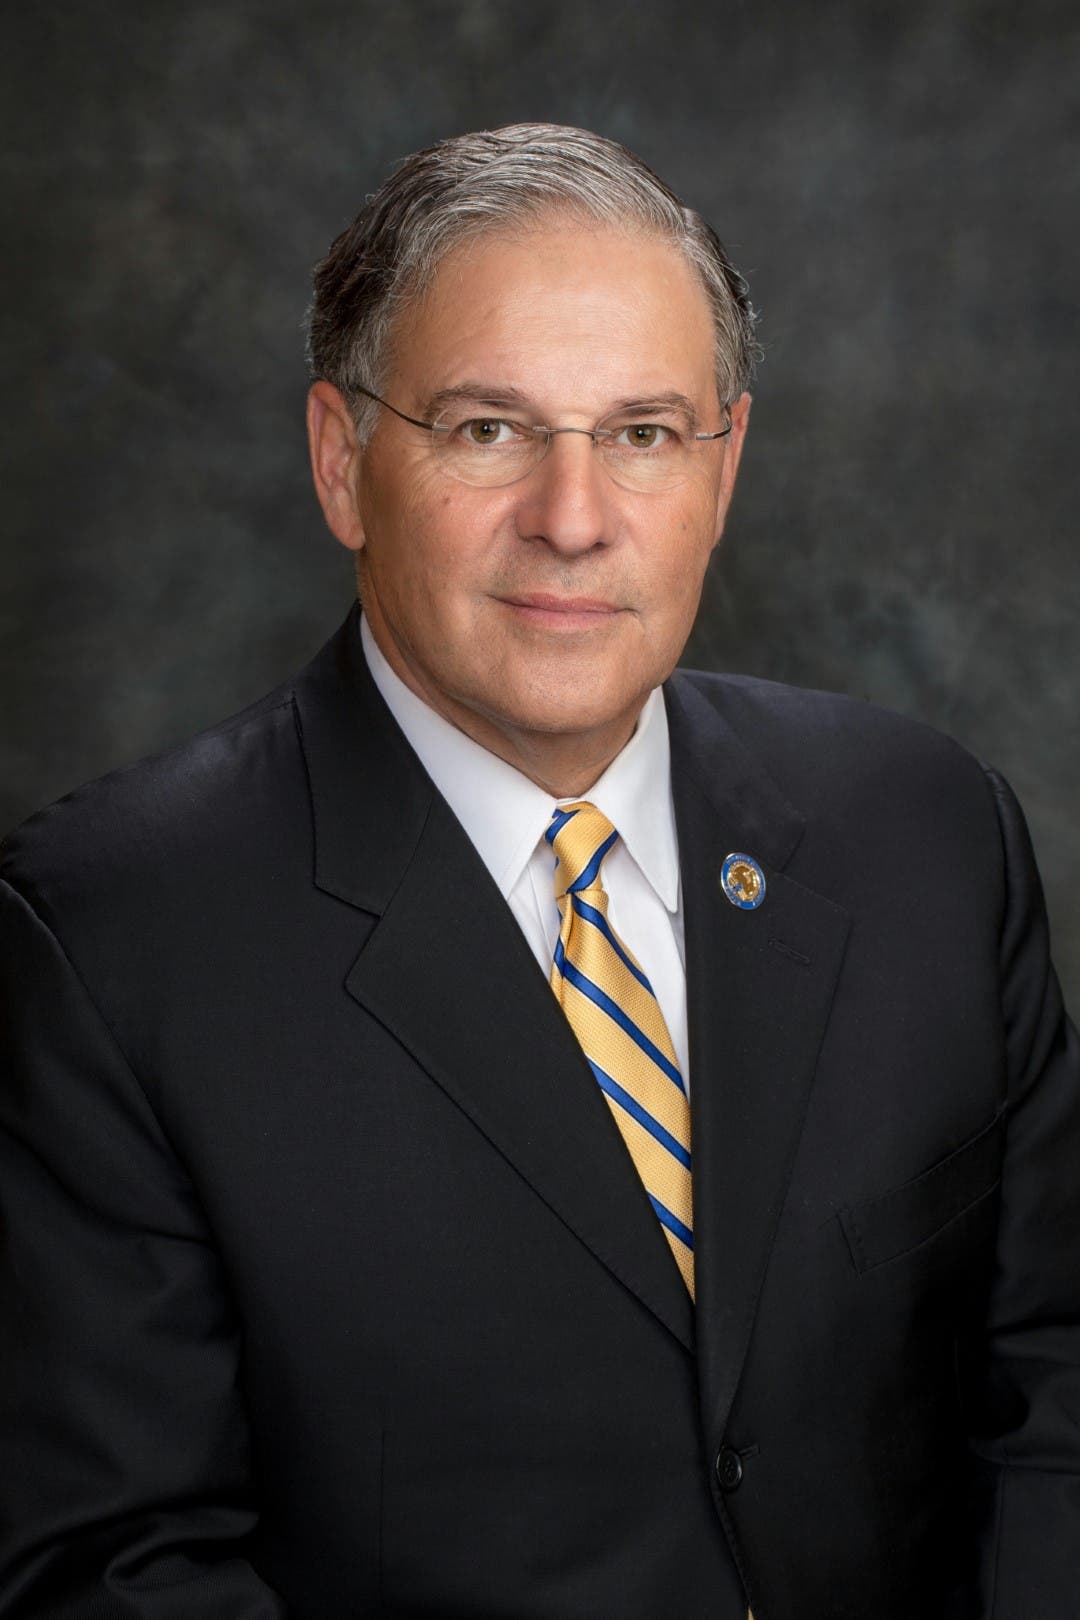 NJ Senator Bramnick to Address Government’s Role in Combatting Growing Anti-Semitic Incidents